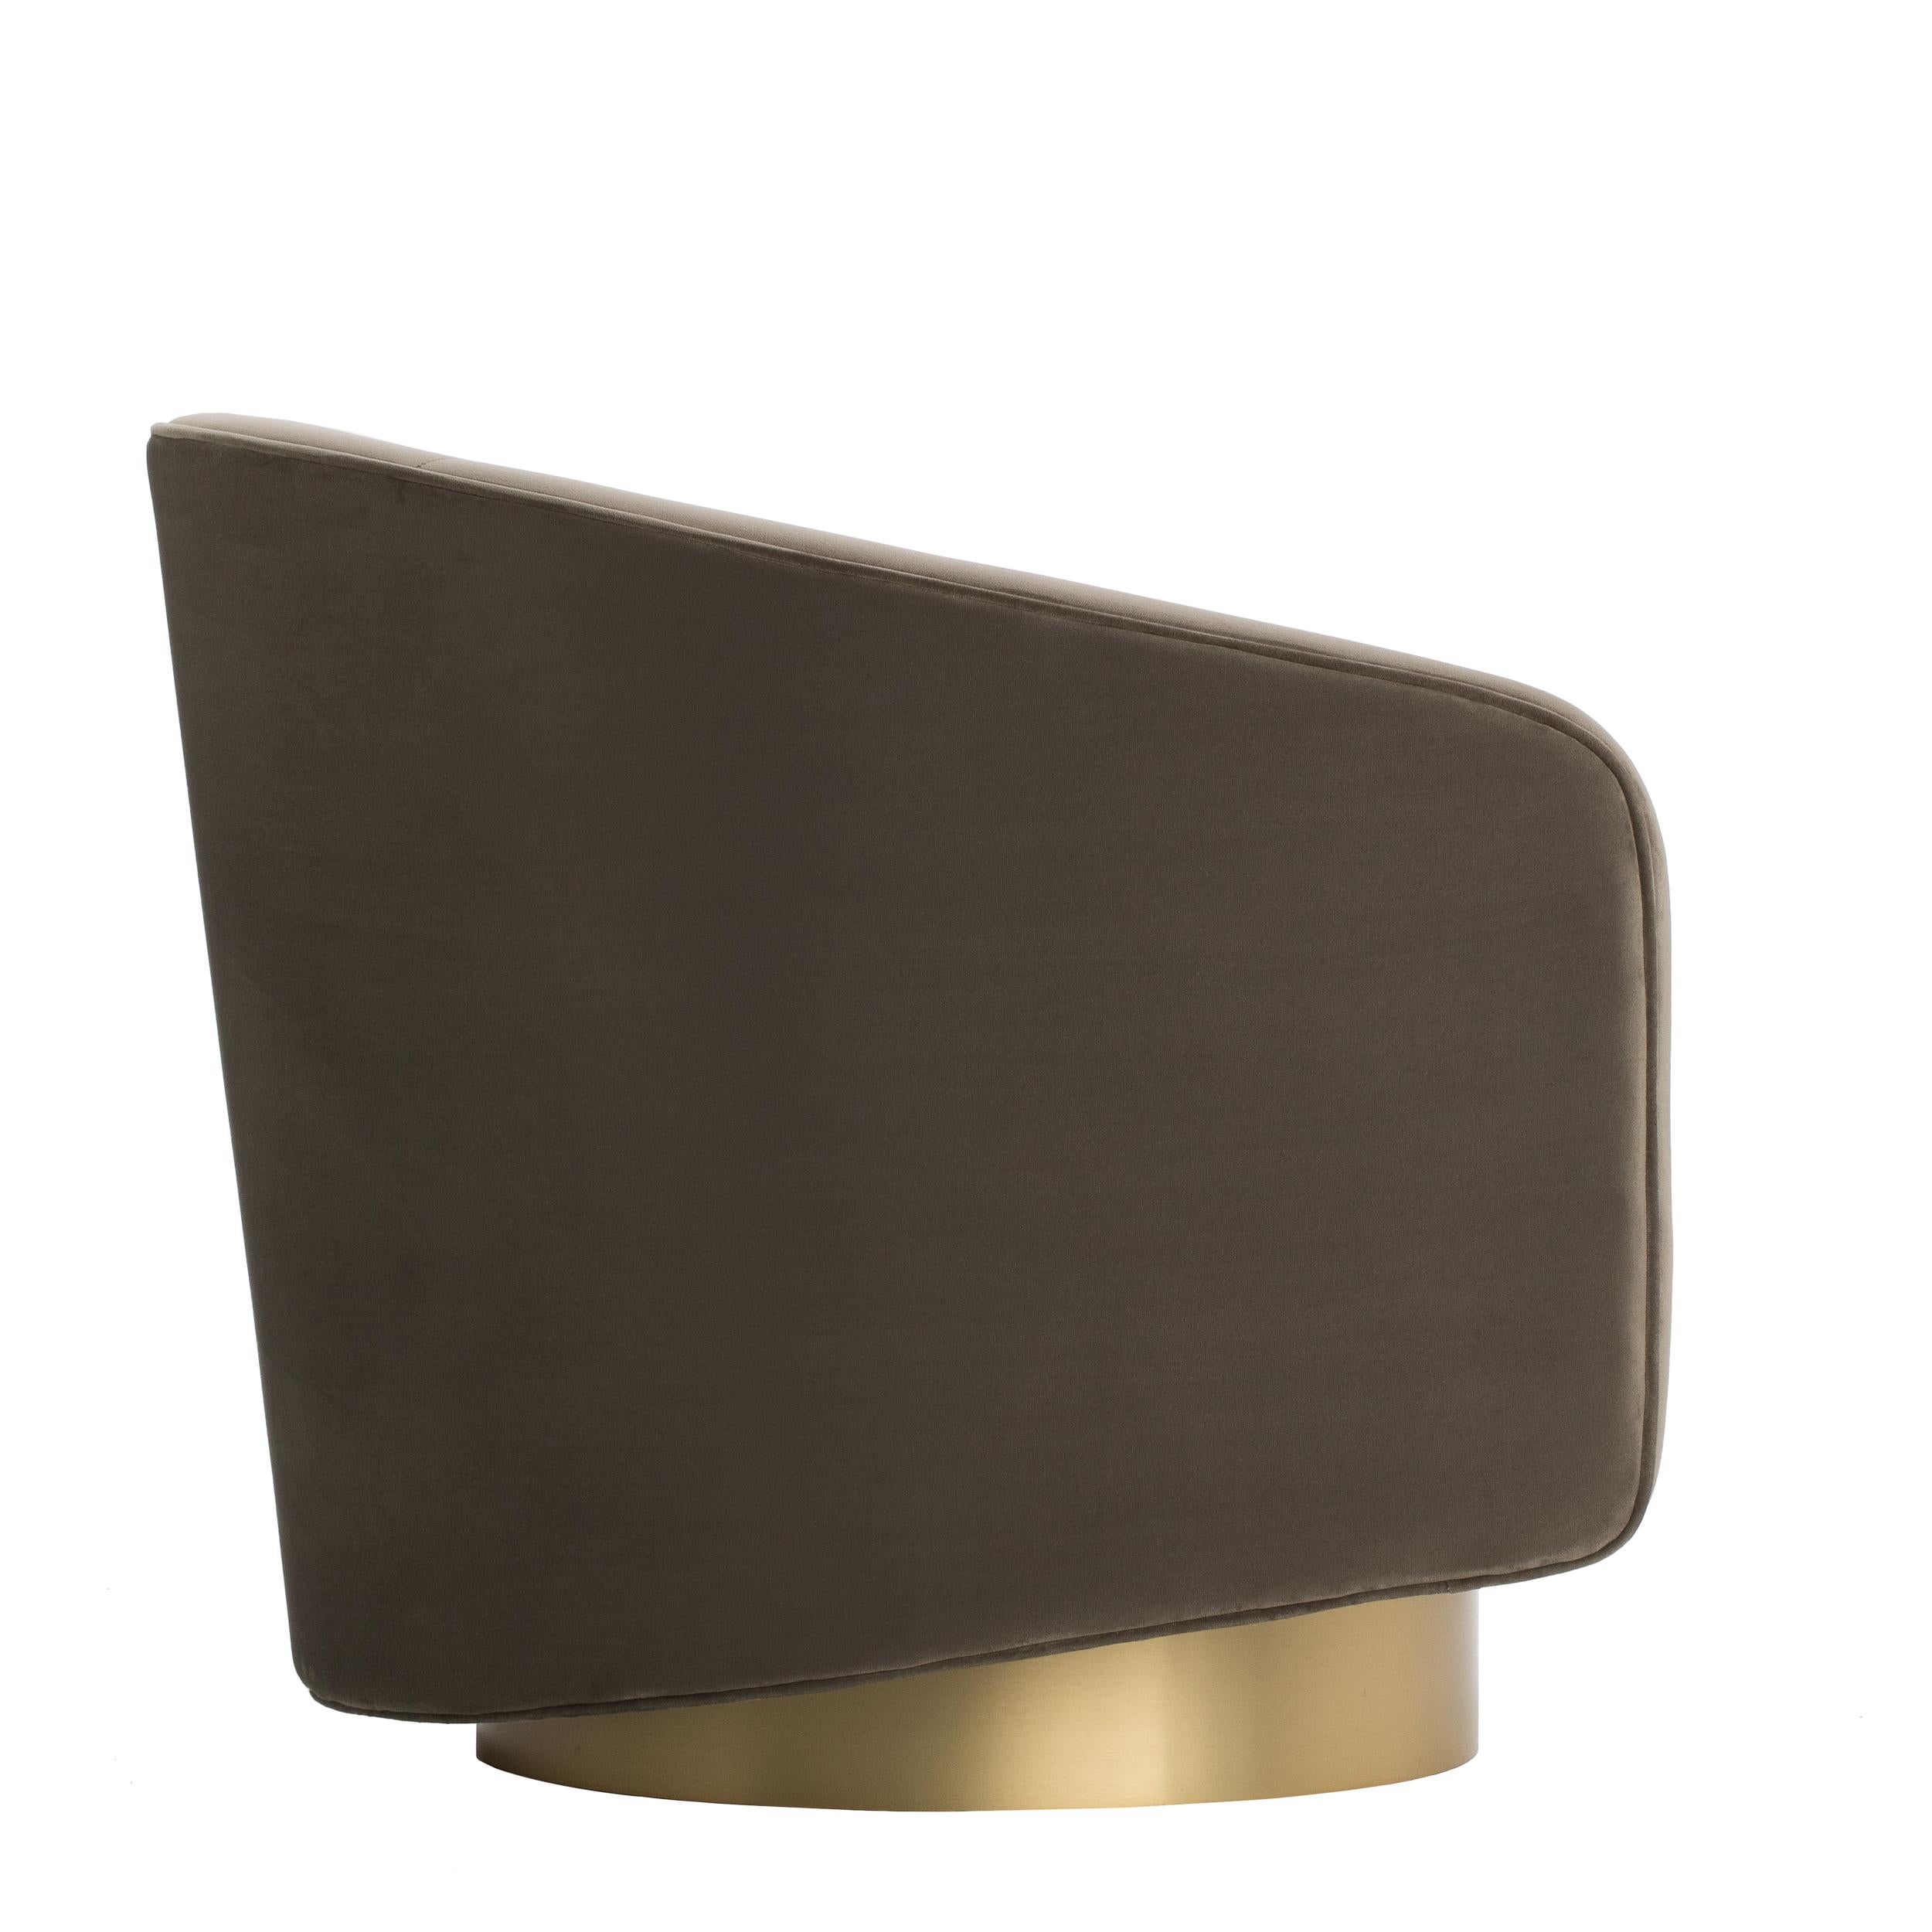 BOEMIA, a swivel fabric armchair with armrest, is the balance between the elegance and the comfort.‎ With an embrassing back structure, is settled on a refined swivel base in antique brass color.

Primary image: shown upholstered with Nature 2773